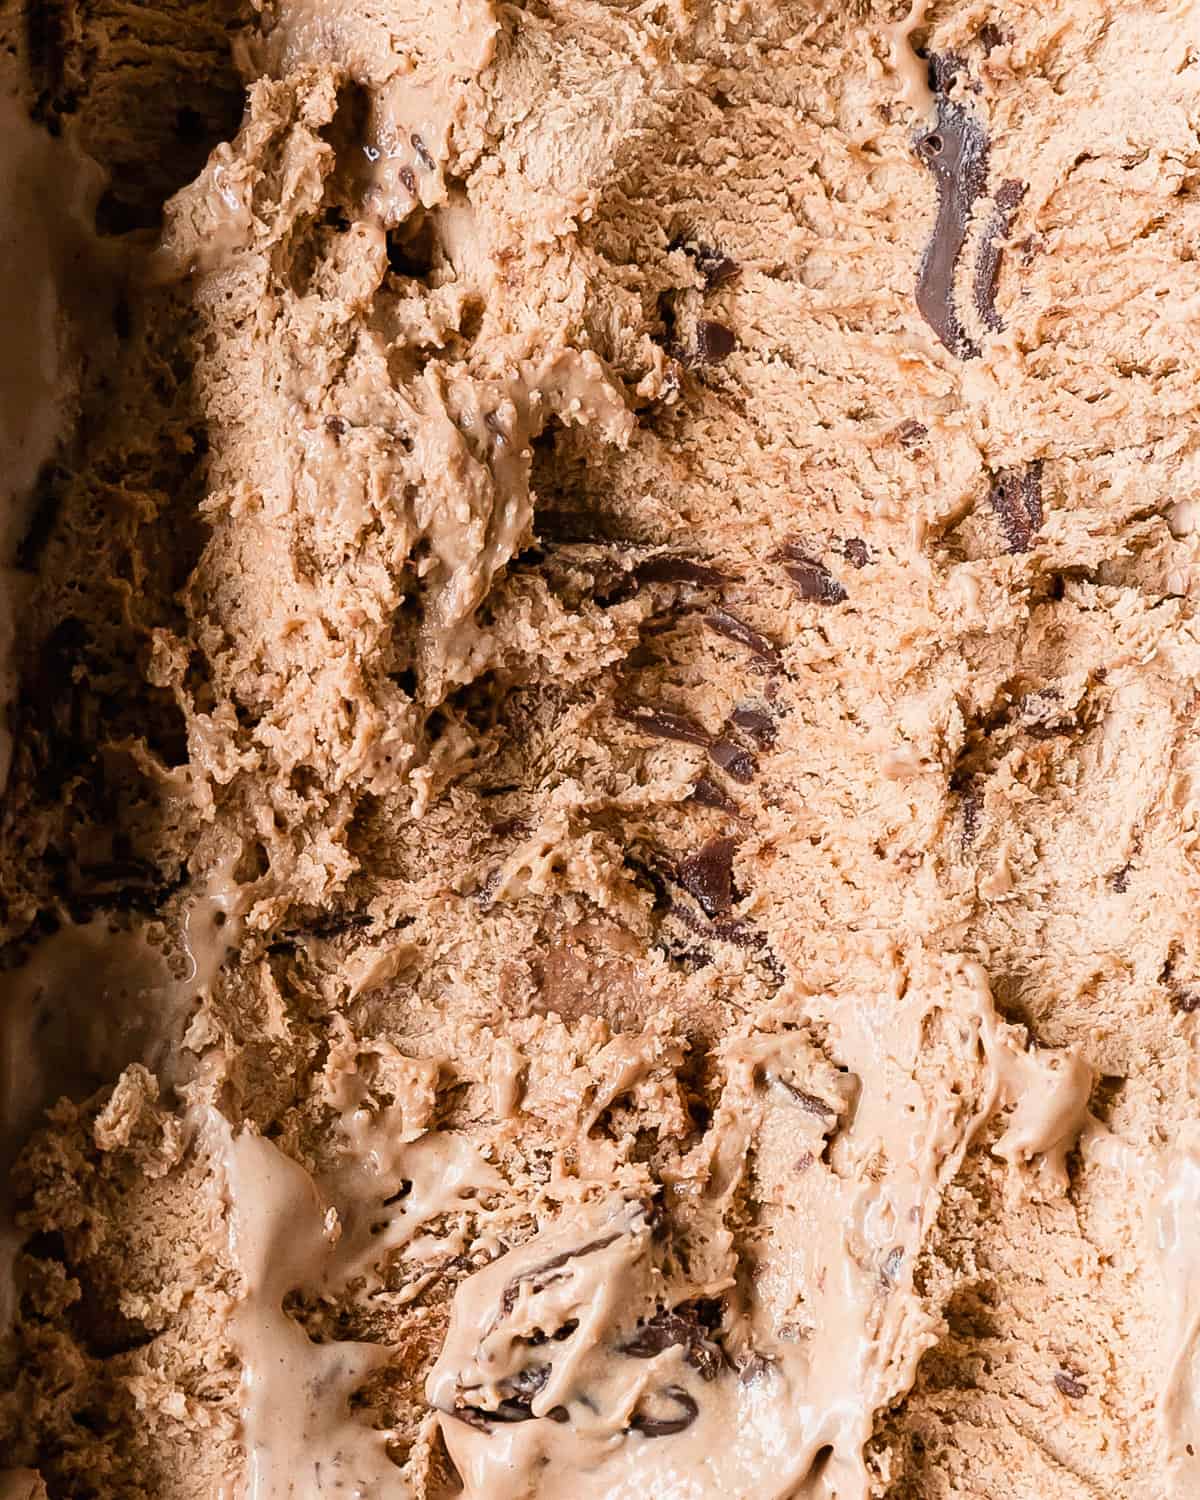 Nutella ice cream is an rich, sweet and creamy, chocolate-y ice cream with Nutella swirled throughout. Learn how to make Nutella ice cream in a few easy steps with with just 5 simple ingredients. This recipe makes the perfect chocolate and hazelnut filled sweet treat.